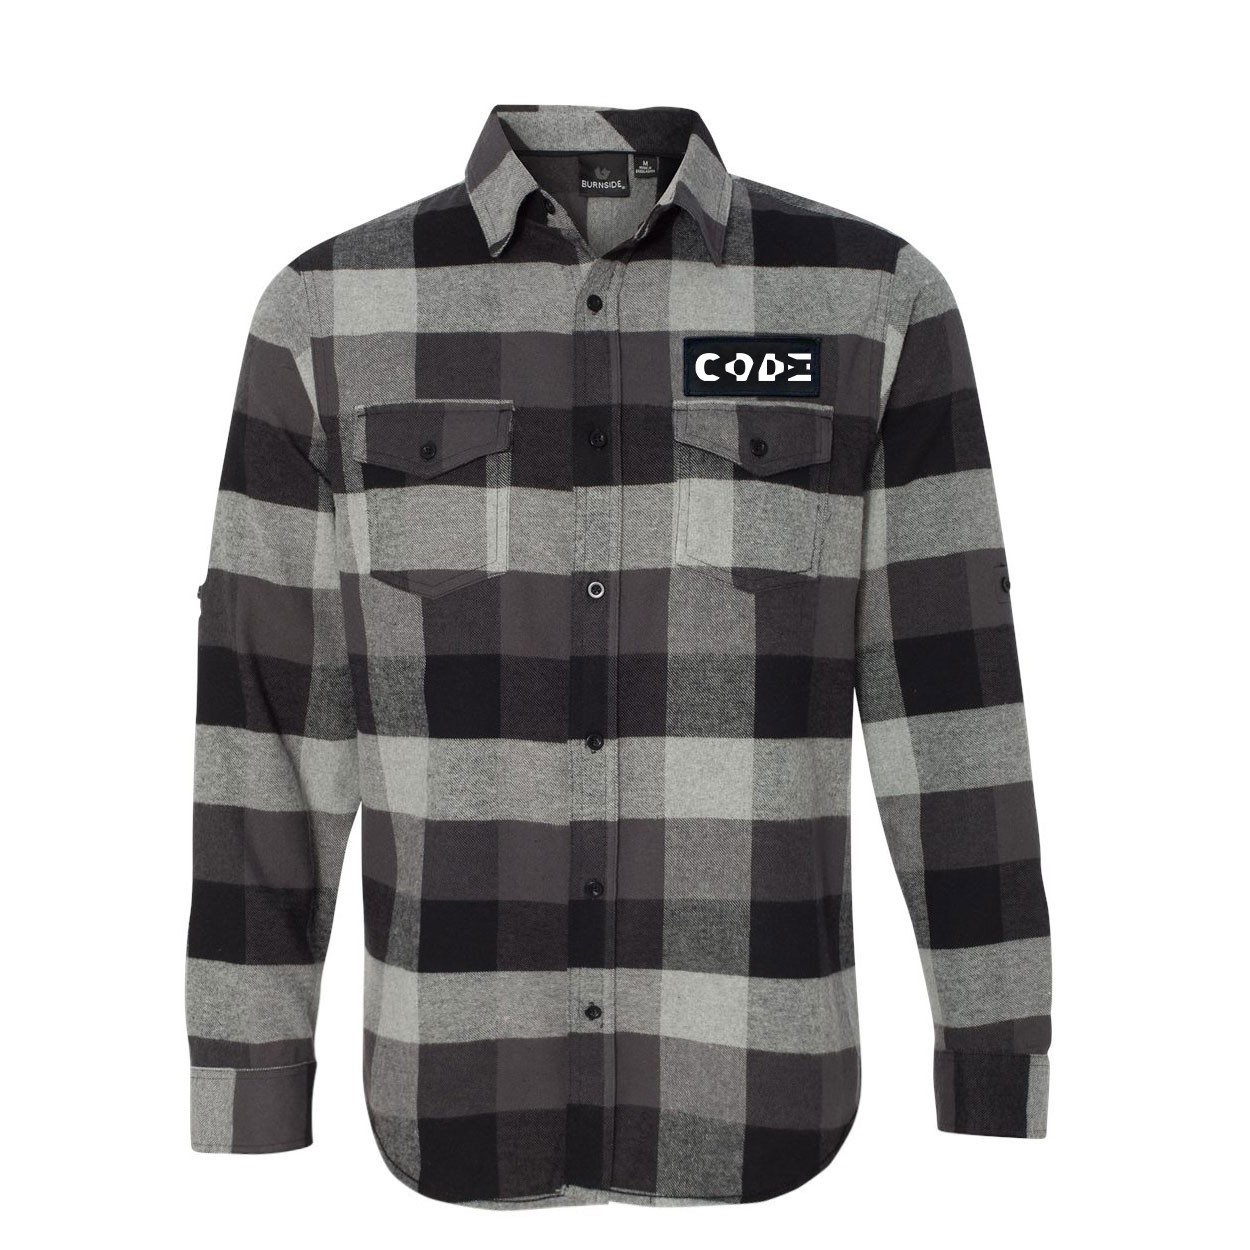 Code Tag Logo Classic Unisex Long Sleeve Woven Patch Flannel Shirt Black/Gray (White Logo)